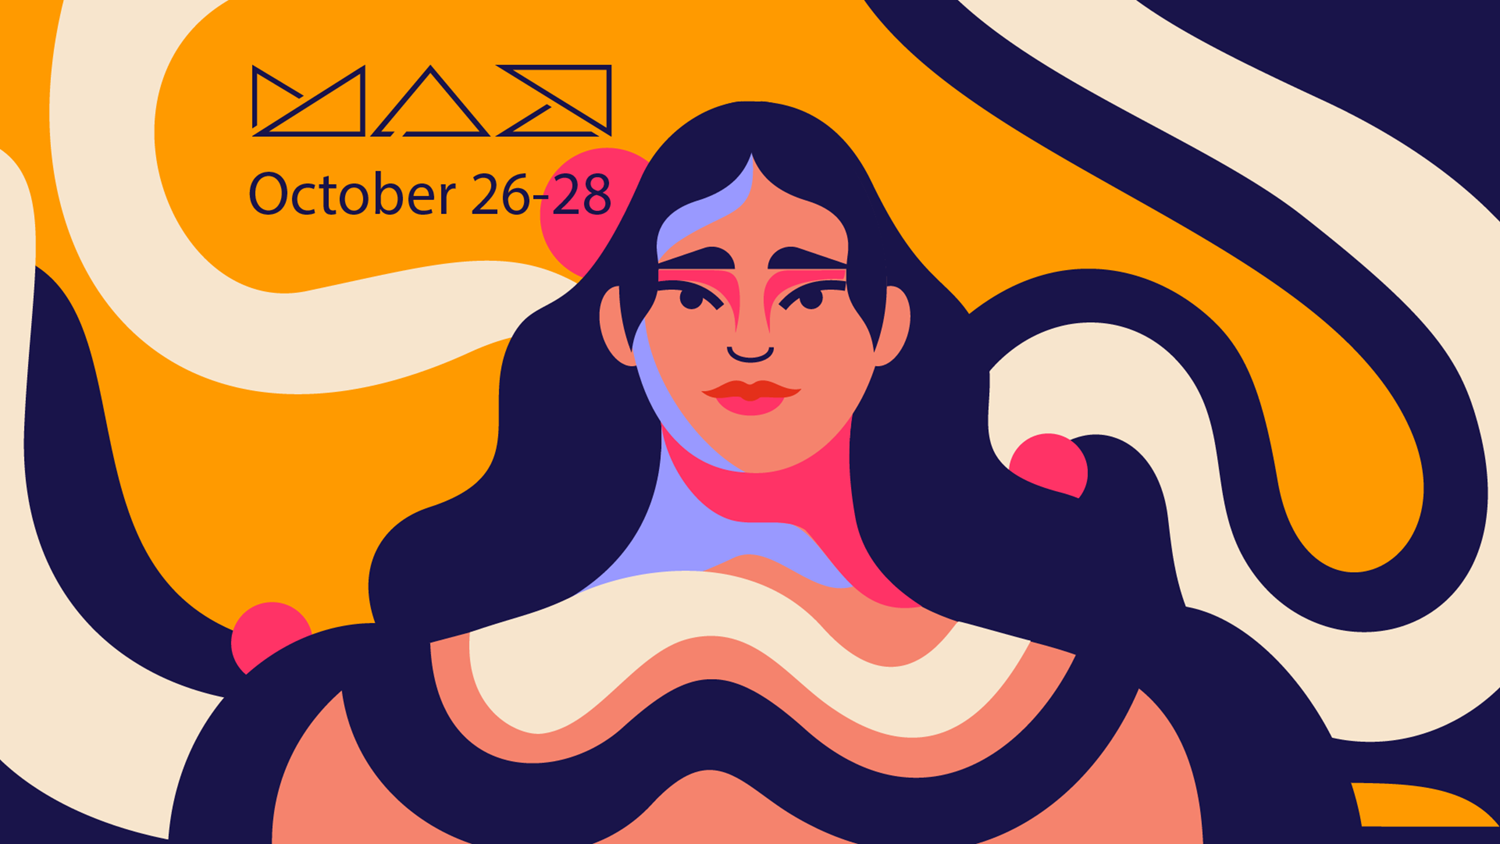 Adobe Max promo poster 2021 by Monsie